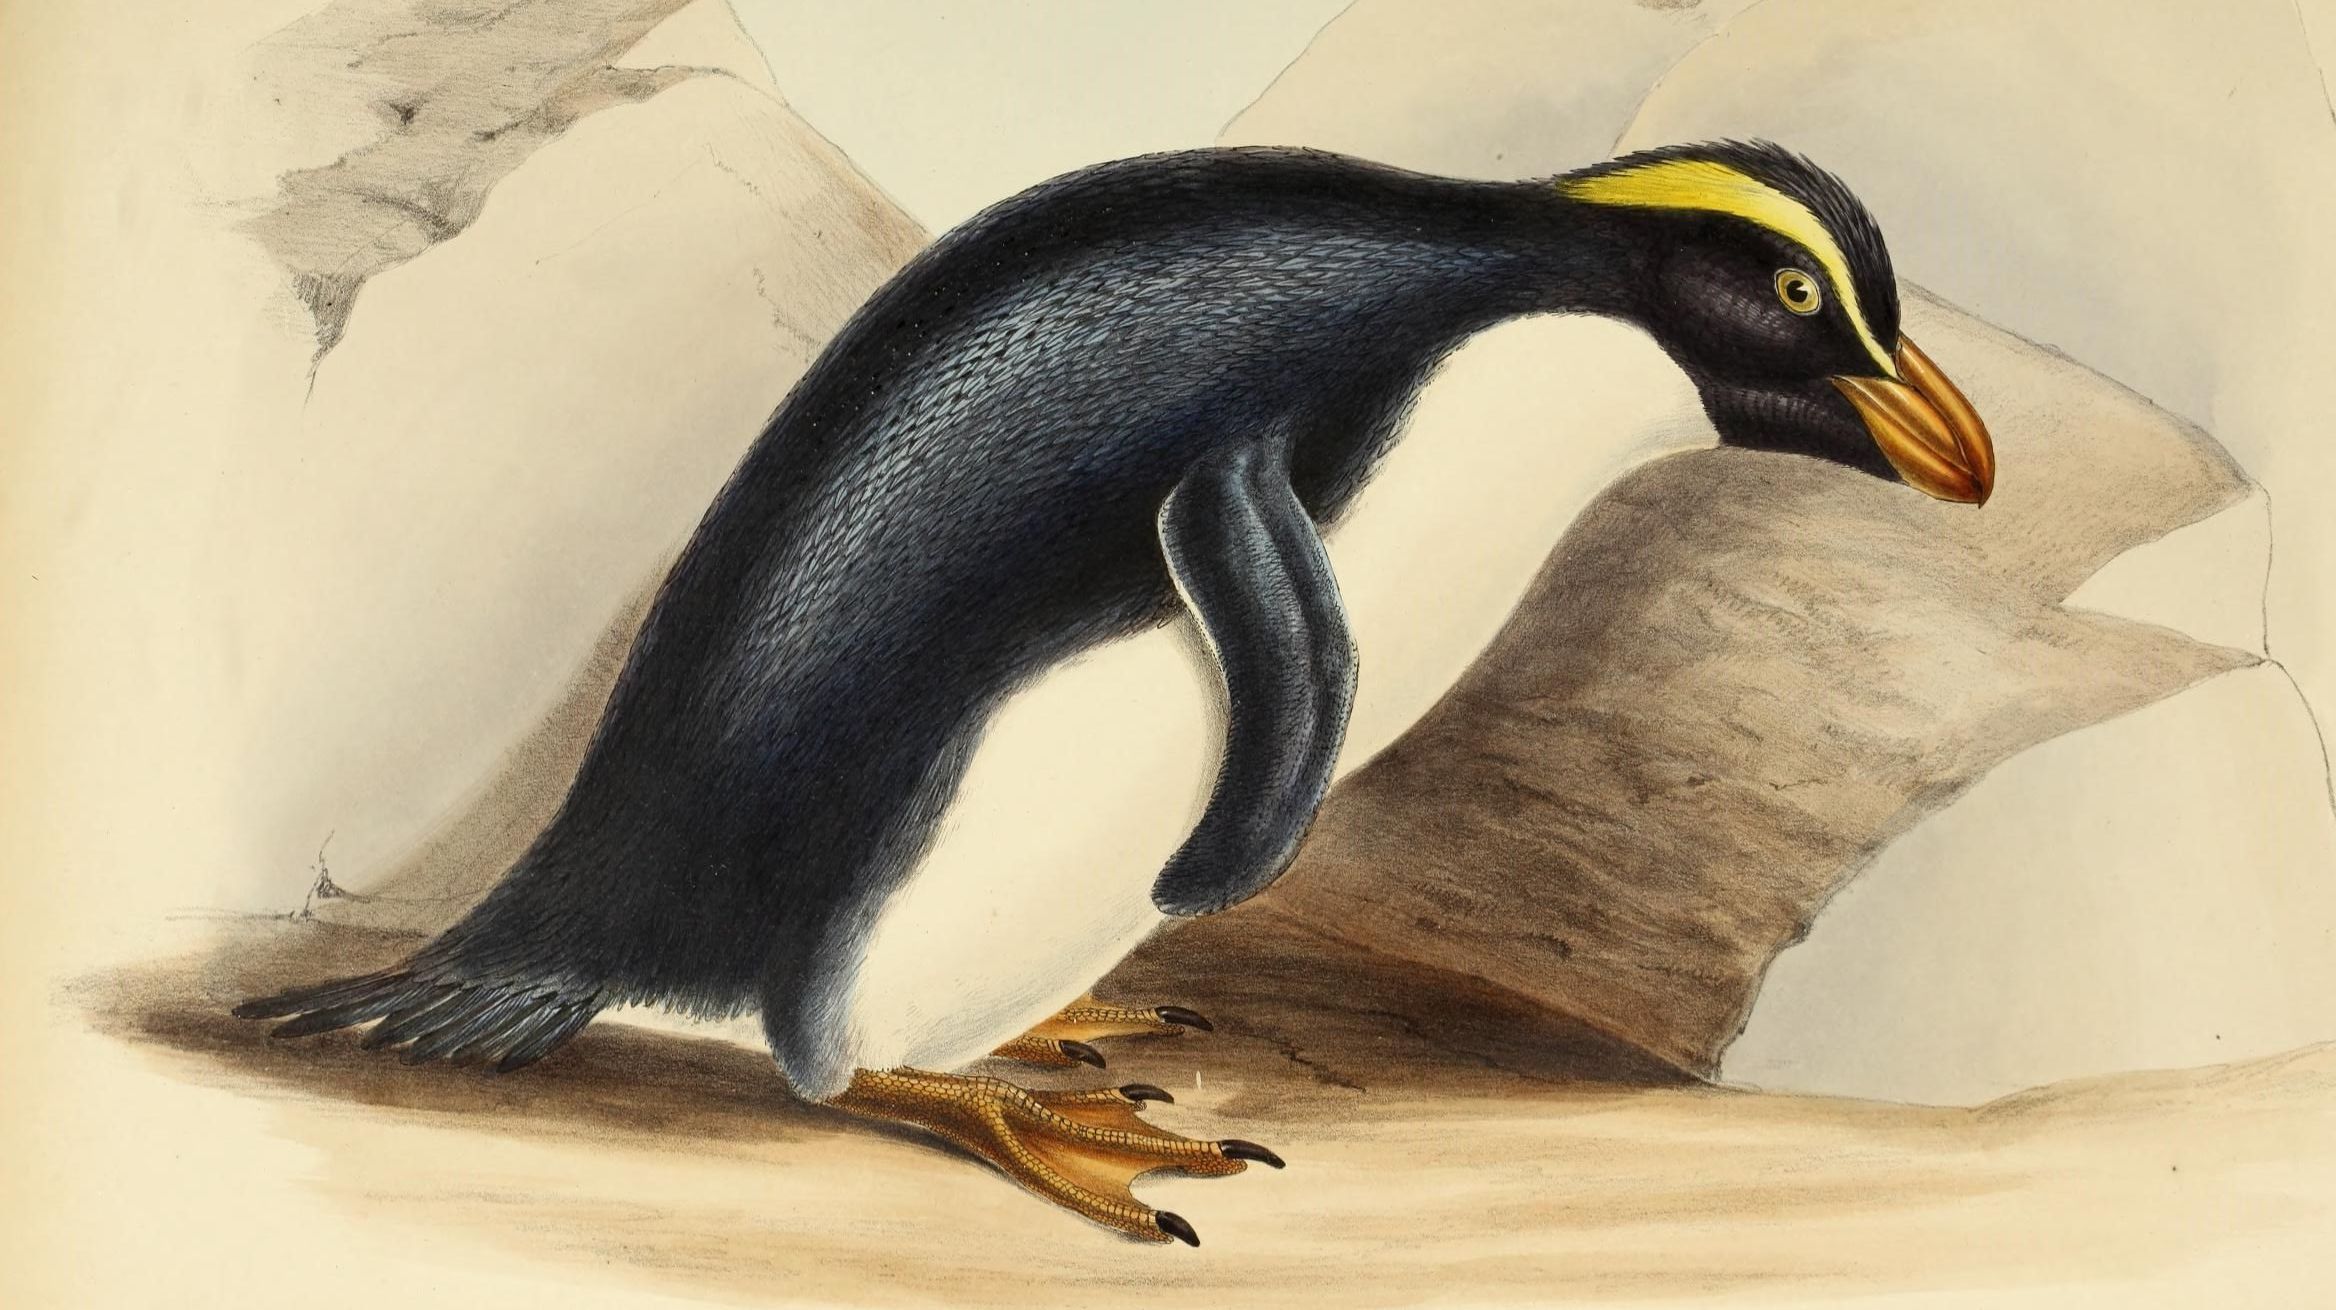 DNA tests show ‘extinct’ species of penguins that never existed